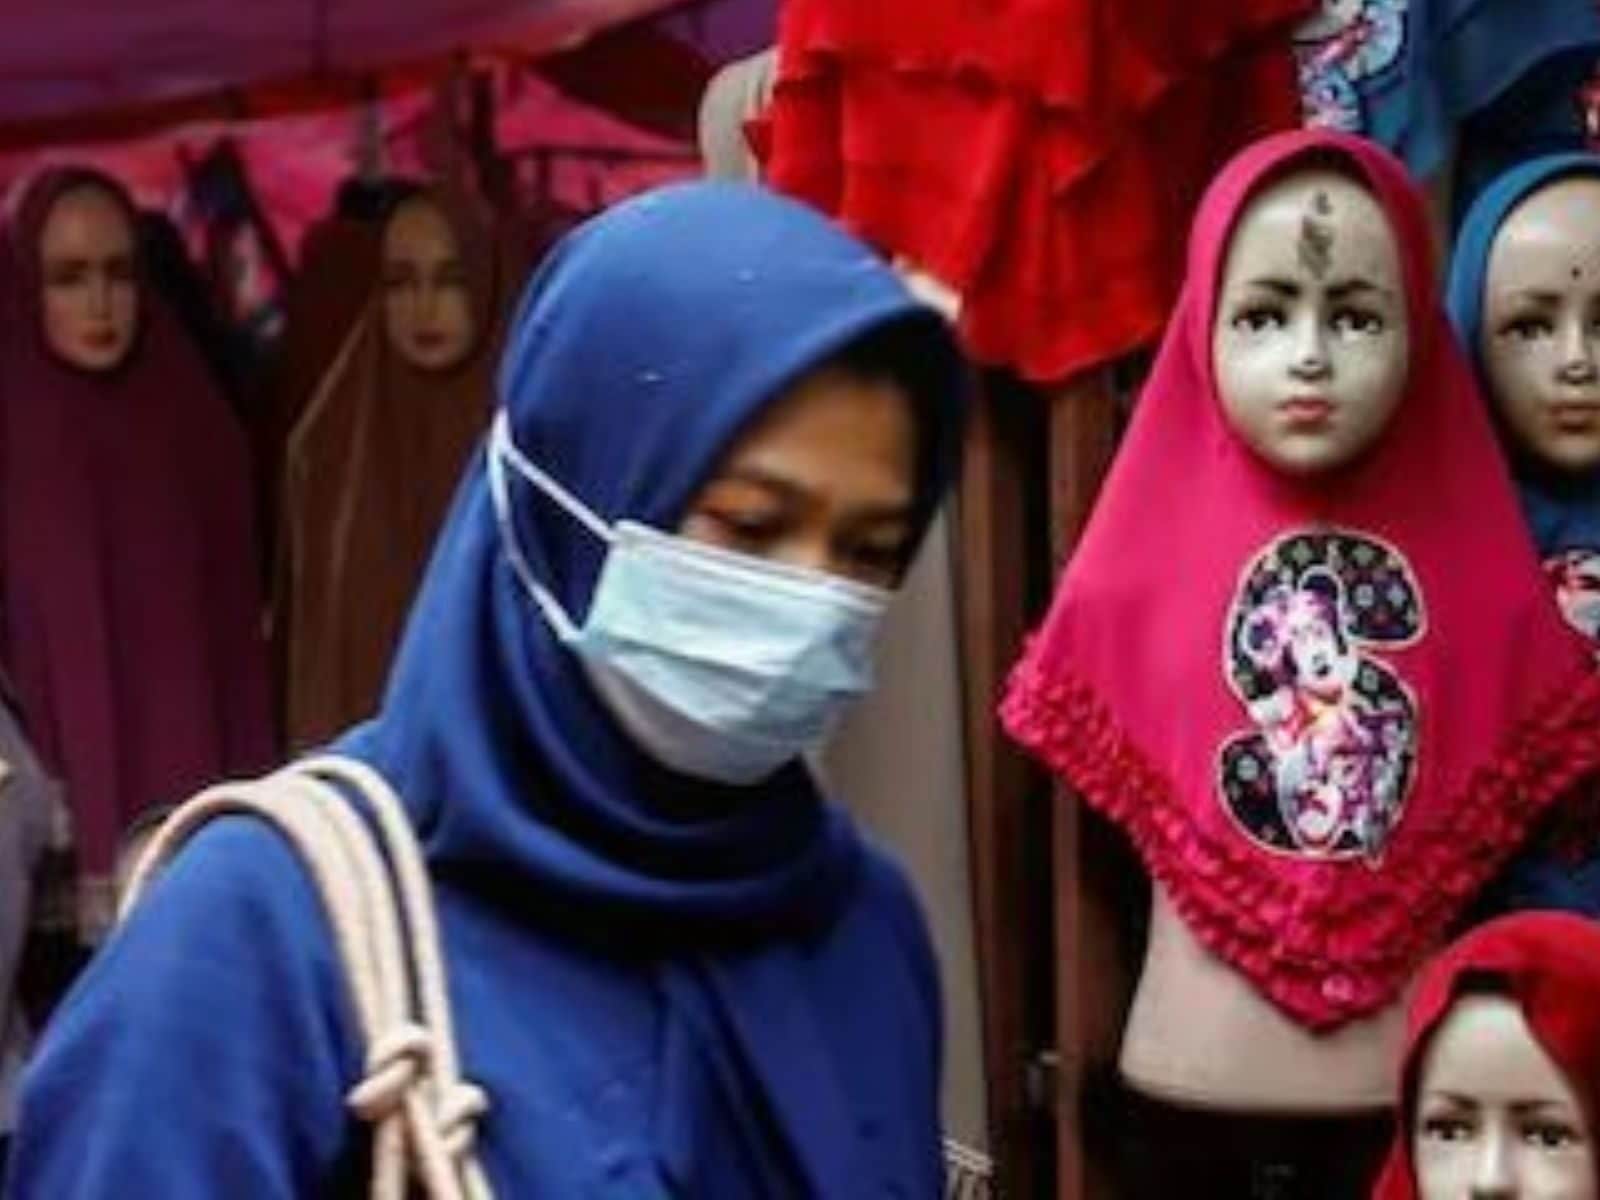 Hijab, Niqab, Burkha What are the Different Kinds of Islamic Clothing for Women? picture